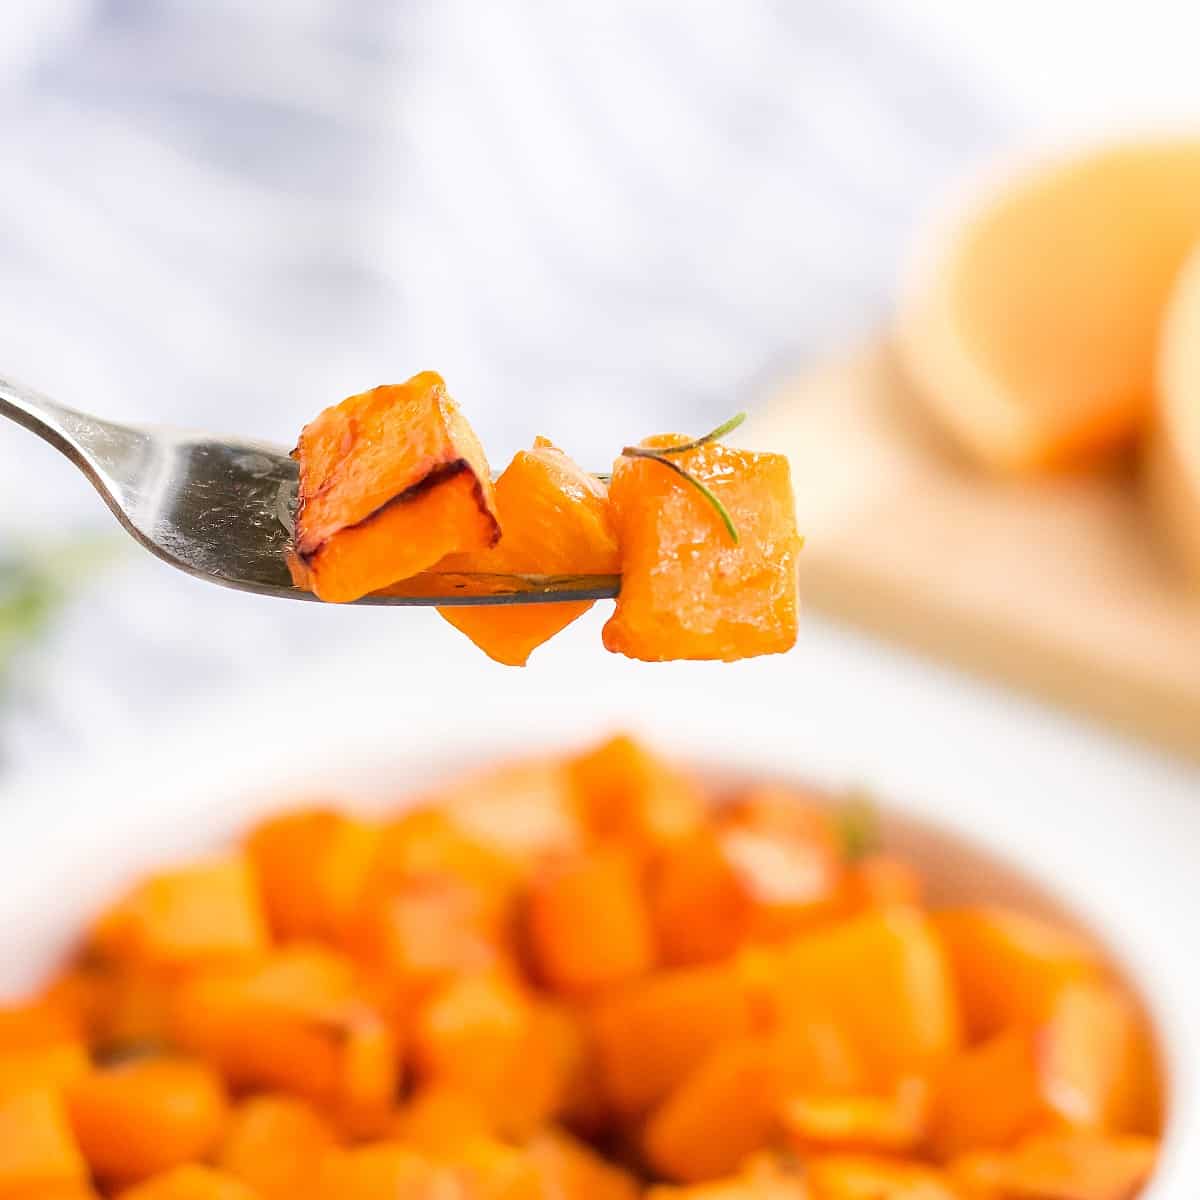 A forkful of butternut squash is help close to the camera lens.